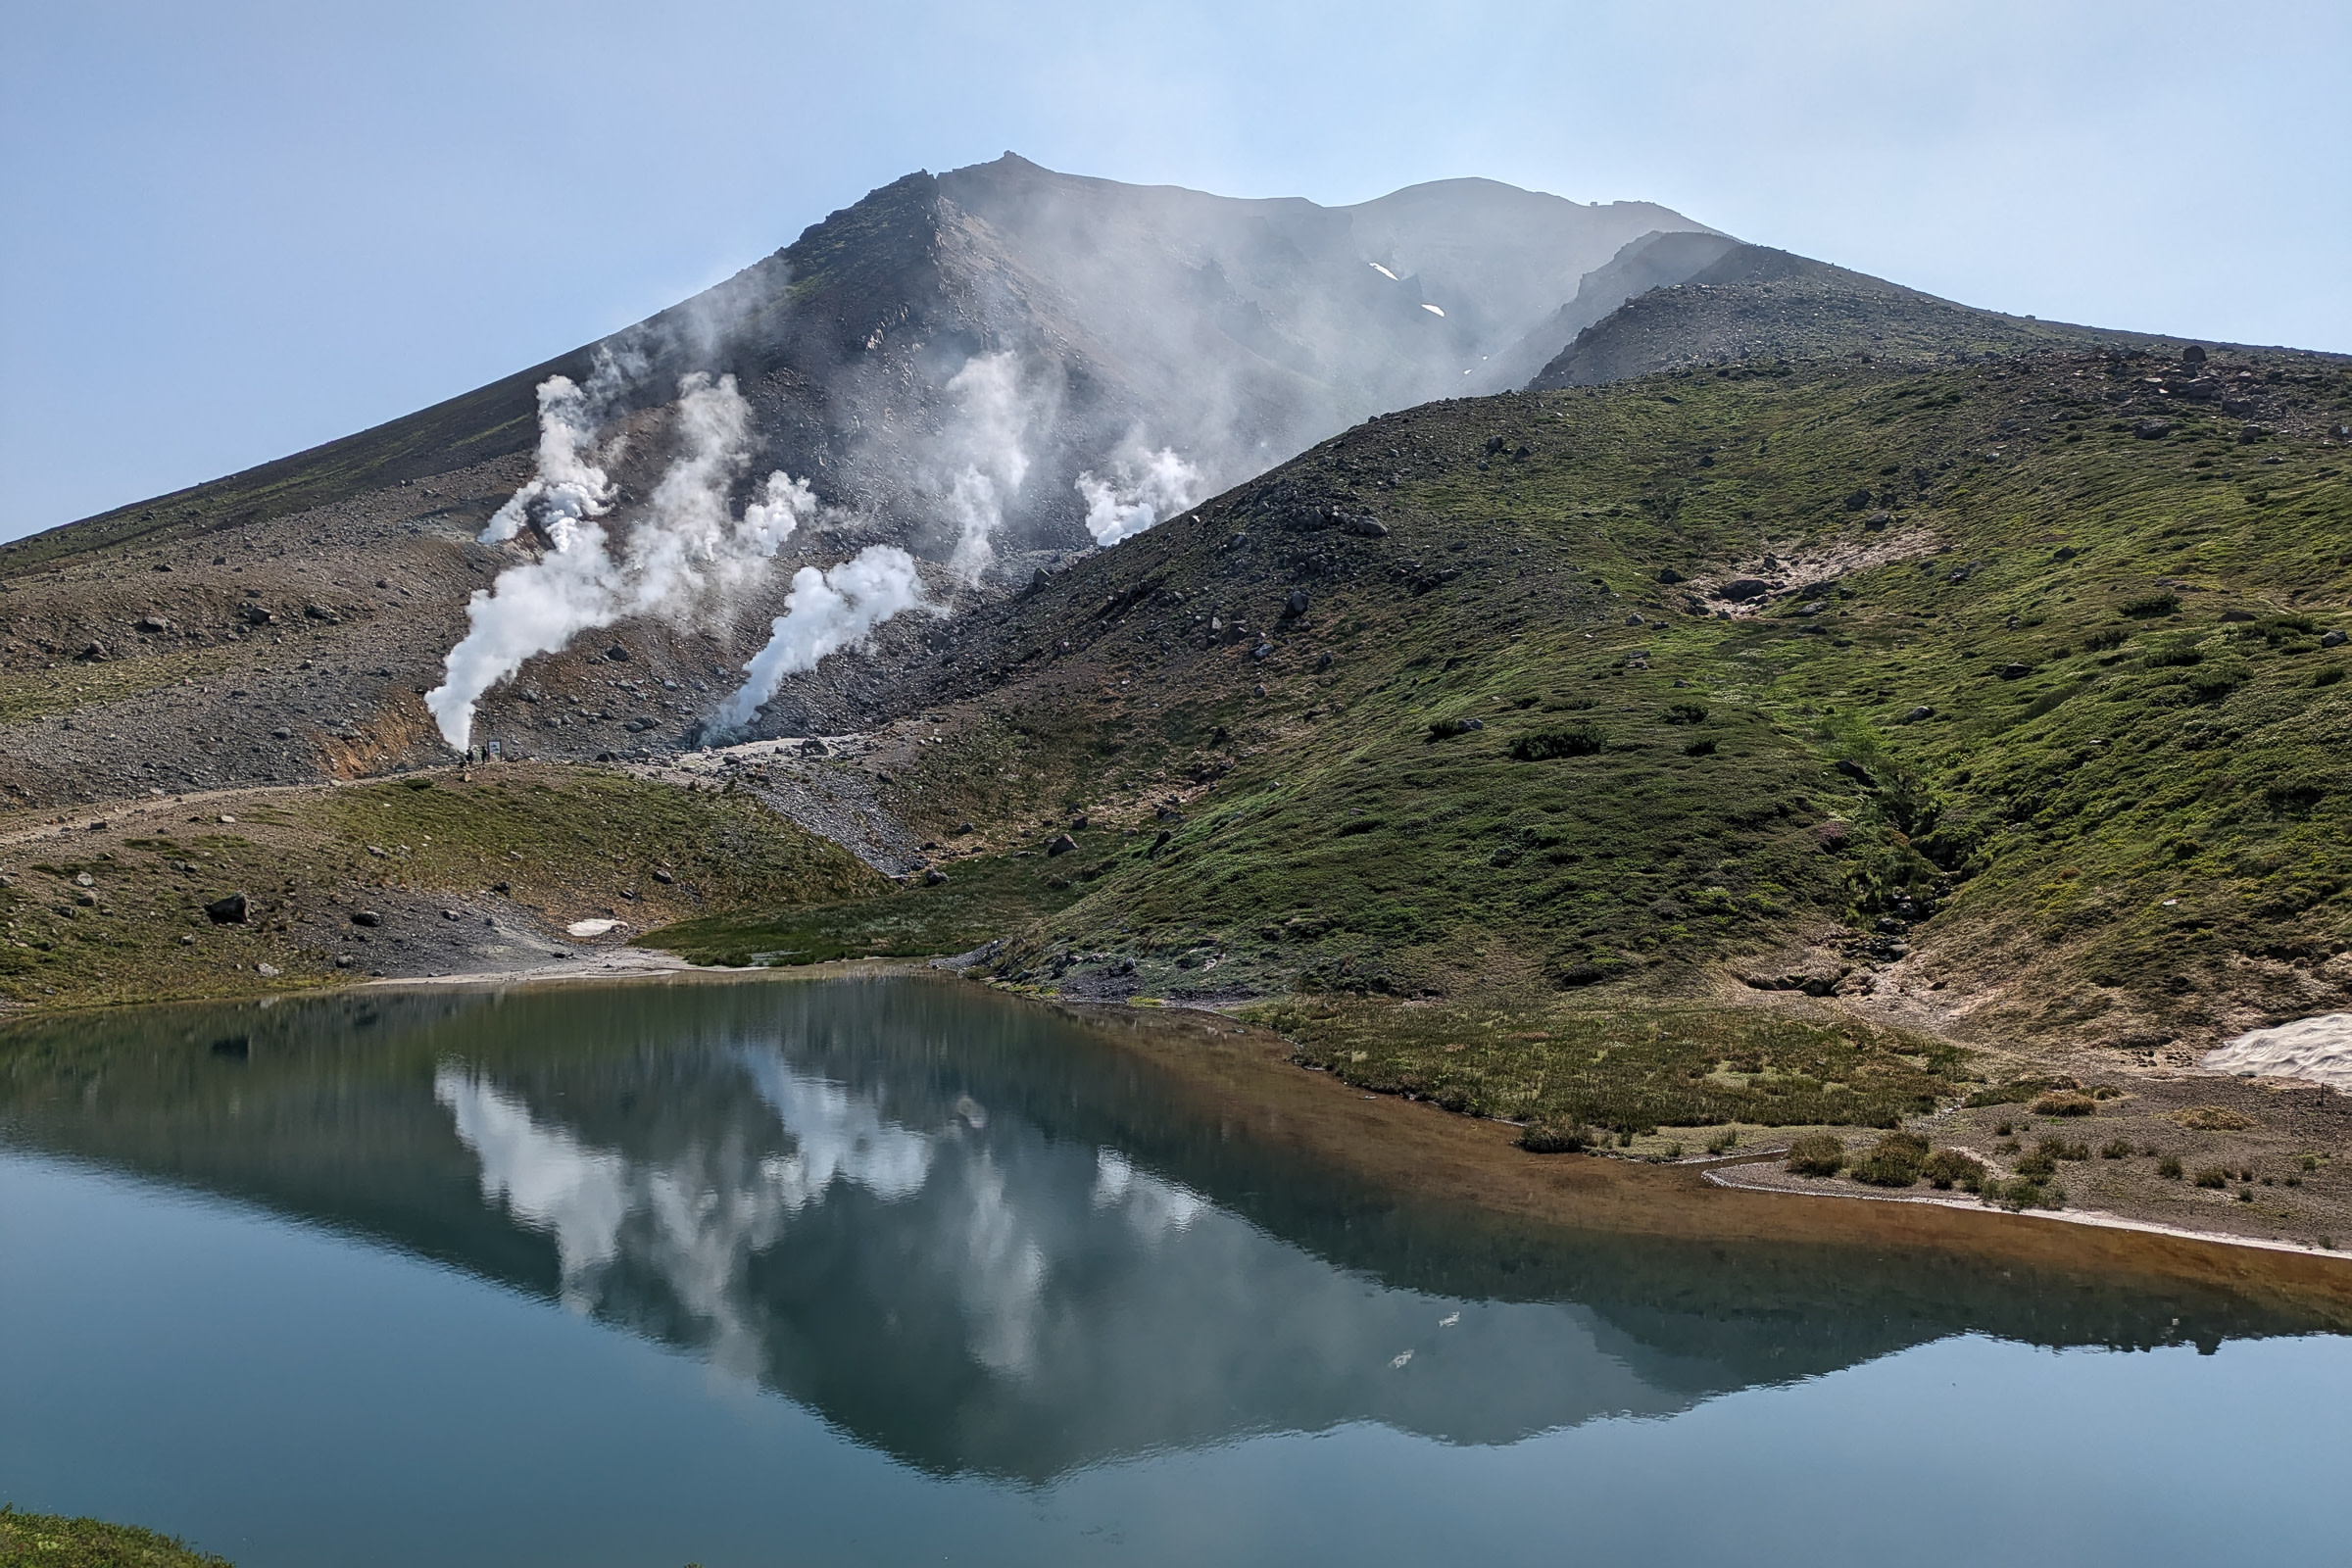 Sugatami Pond in midsummer, perfectly reflecting the cone of Mt. Asahidake in the background, smoking volcanic vents on the mountainside.